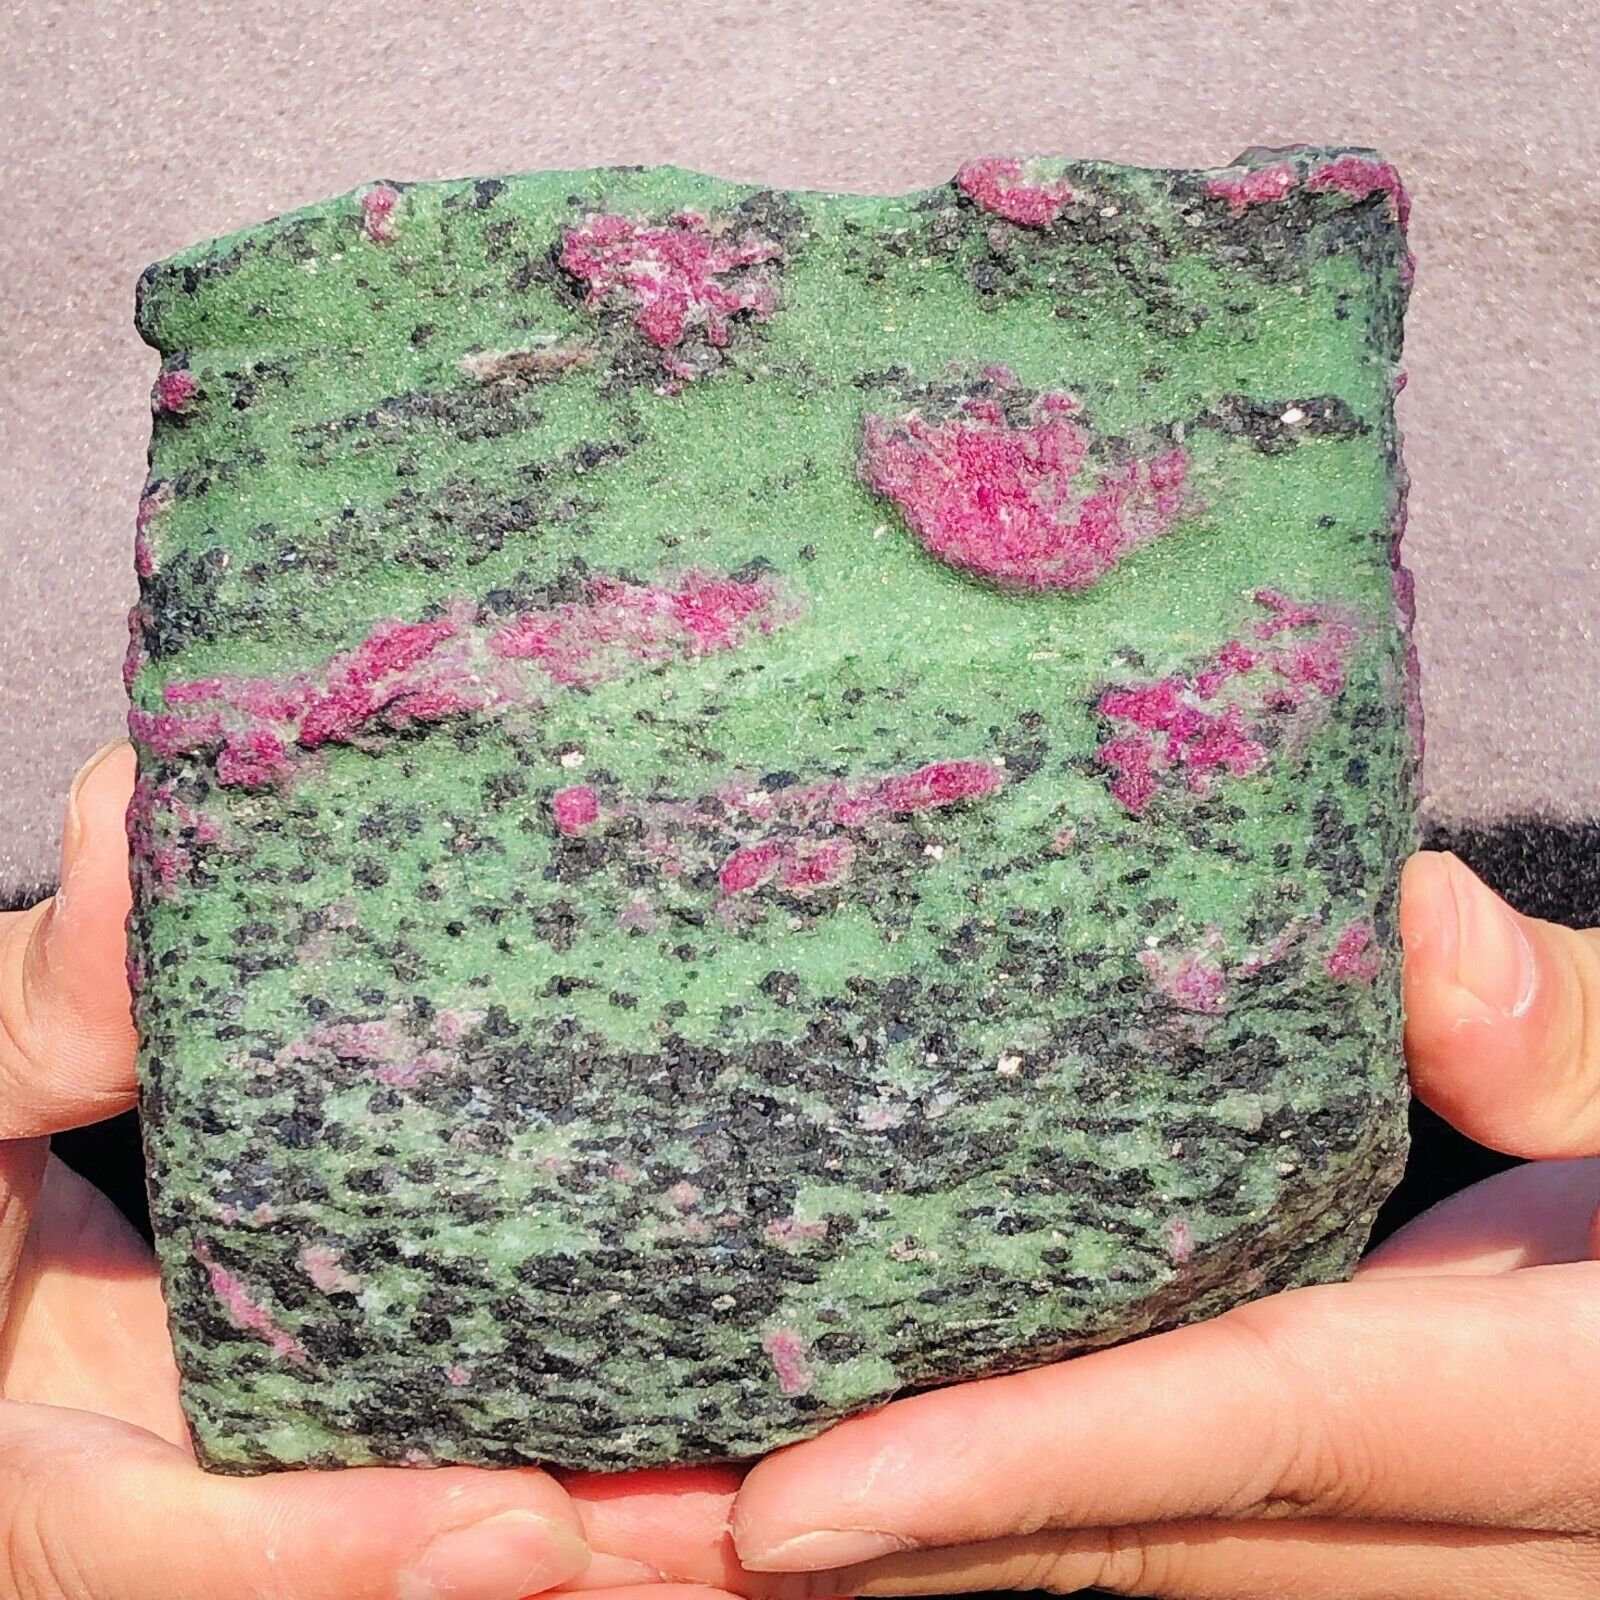 5.22lb Large Rare Natural Red Green Gemstone Ruby Zoisite Crystal Rough Mineral